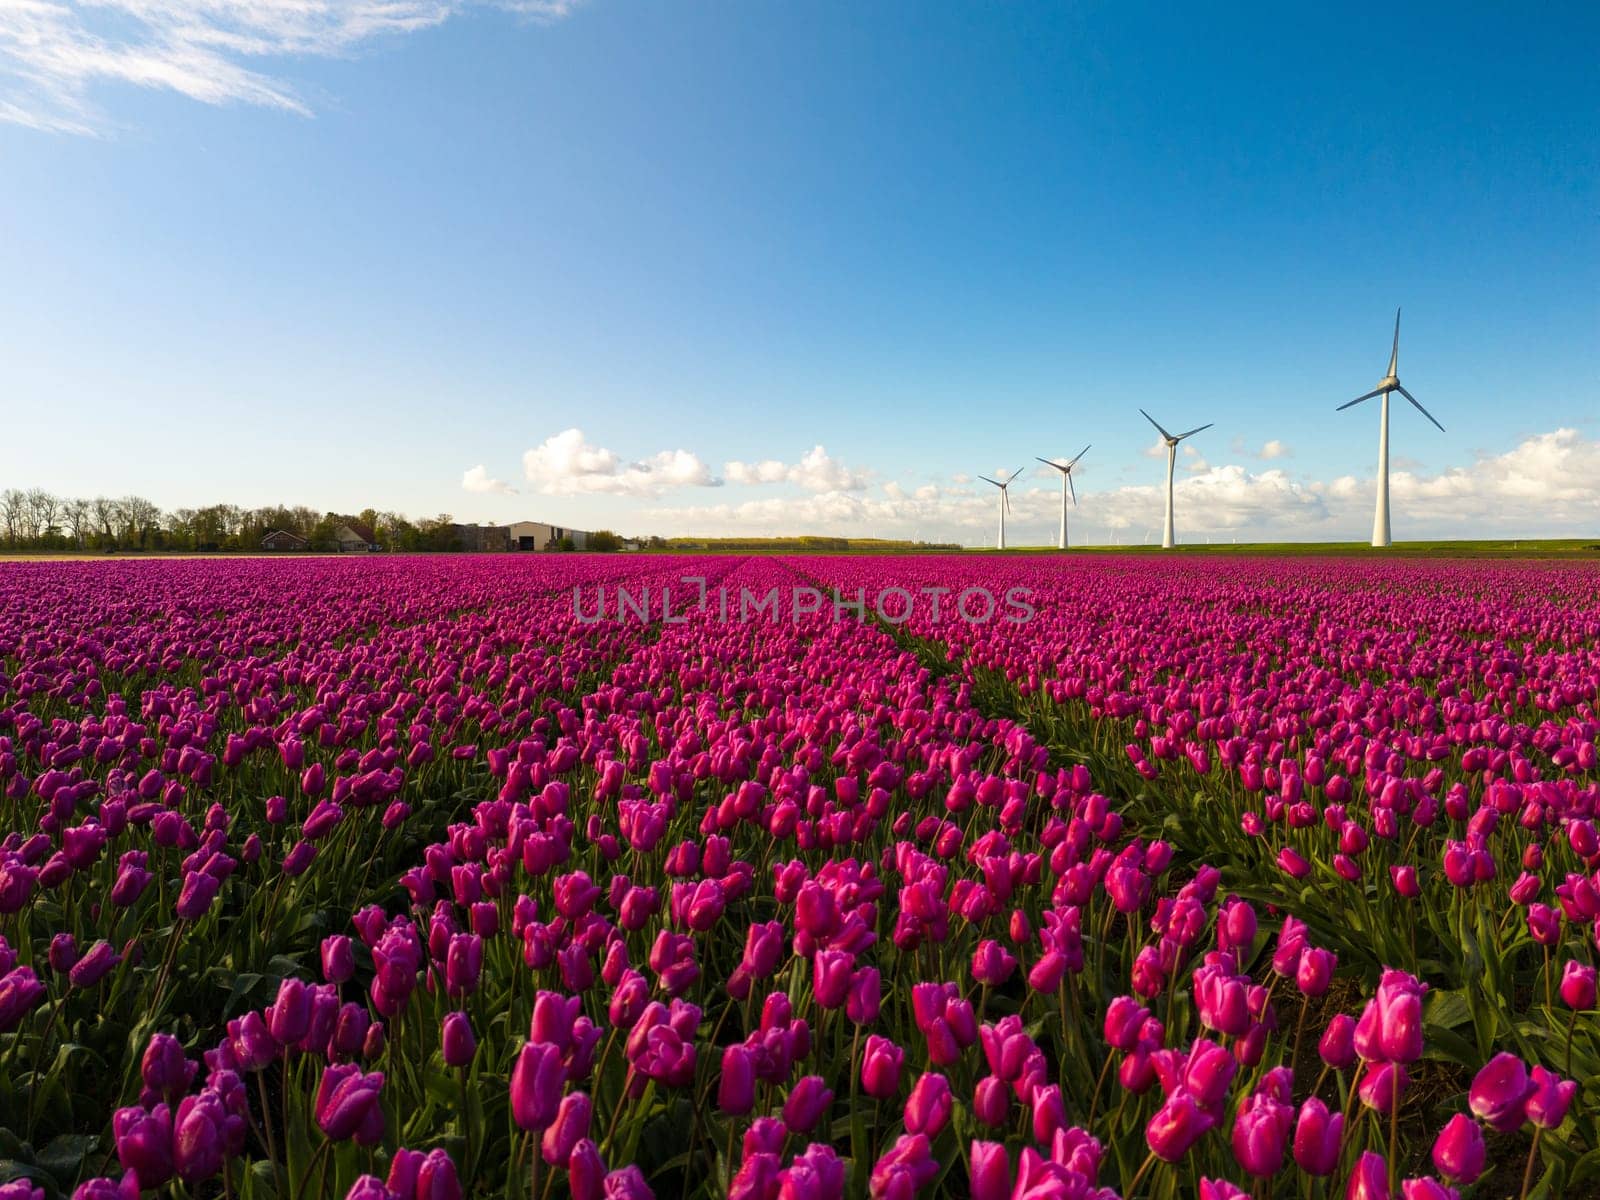 A vibrant field of purple tulips swaying in the breeze, with traditional windmill turbines in the background against a clear blue sky by fokkebok